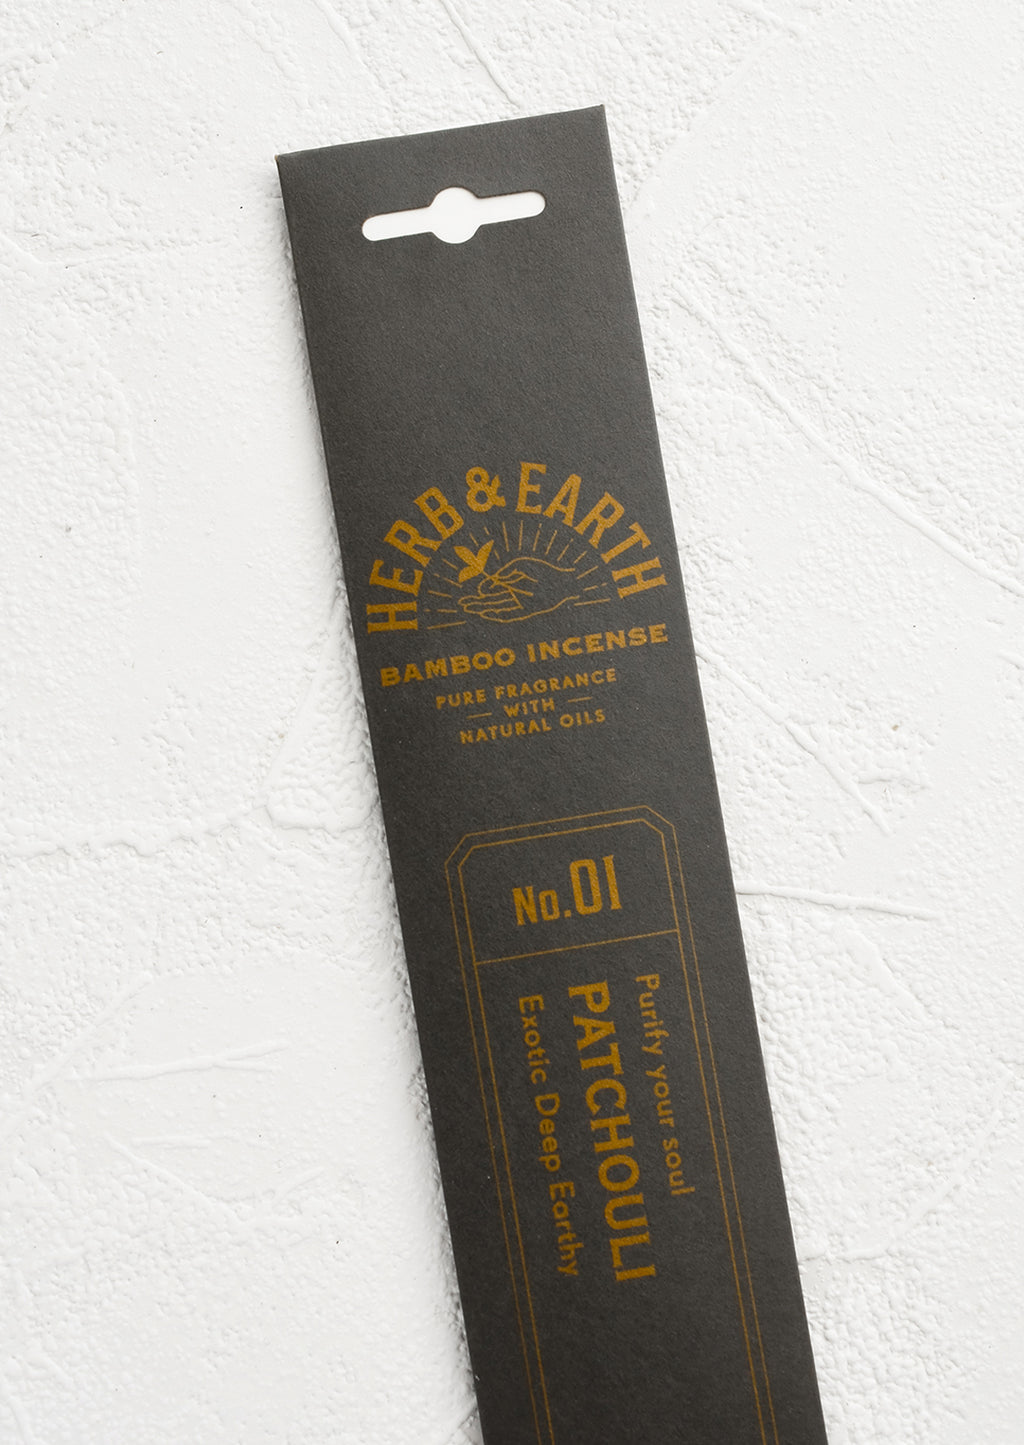 Patchouli: A dark grey packaging sleeve containing patchouli scented incense.